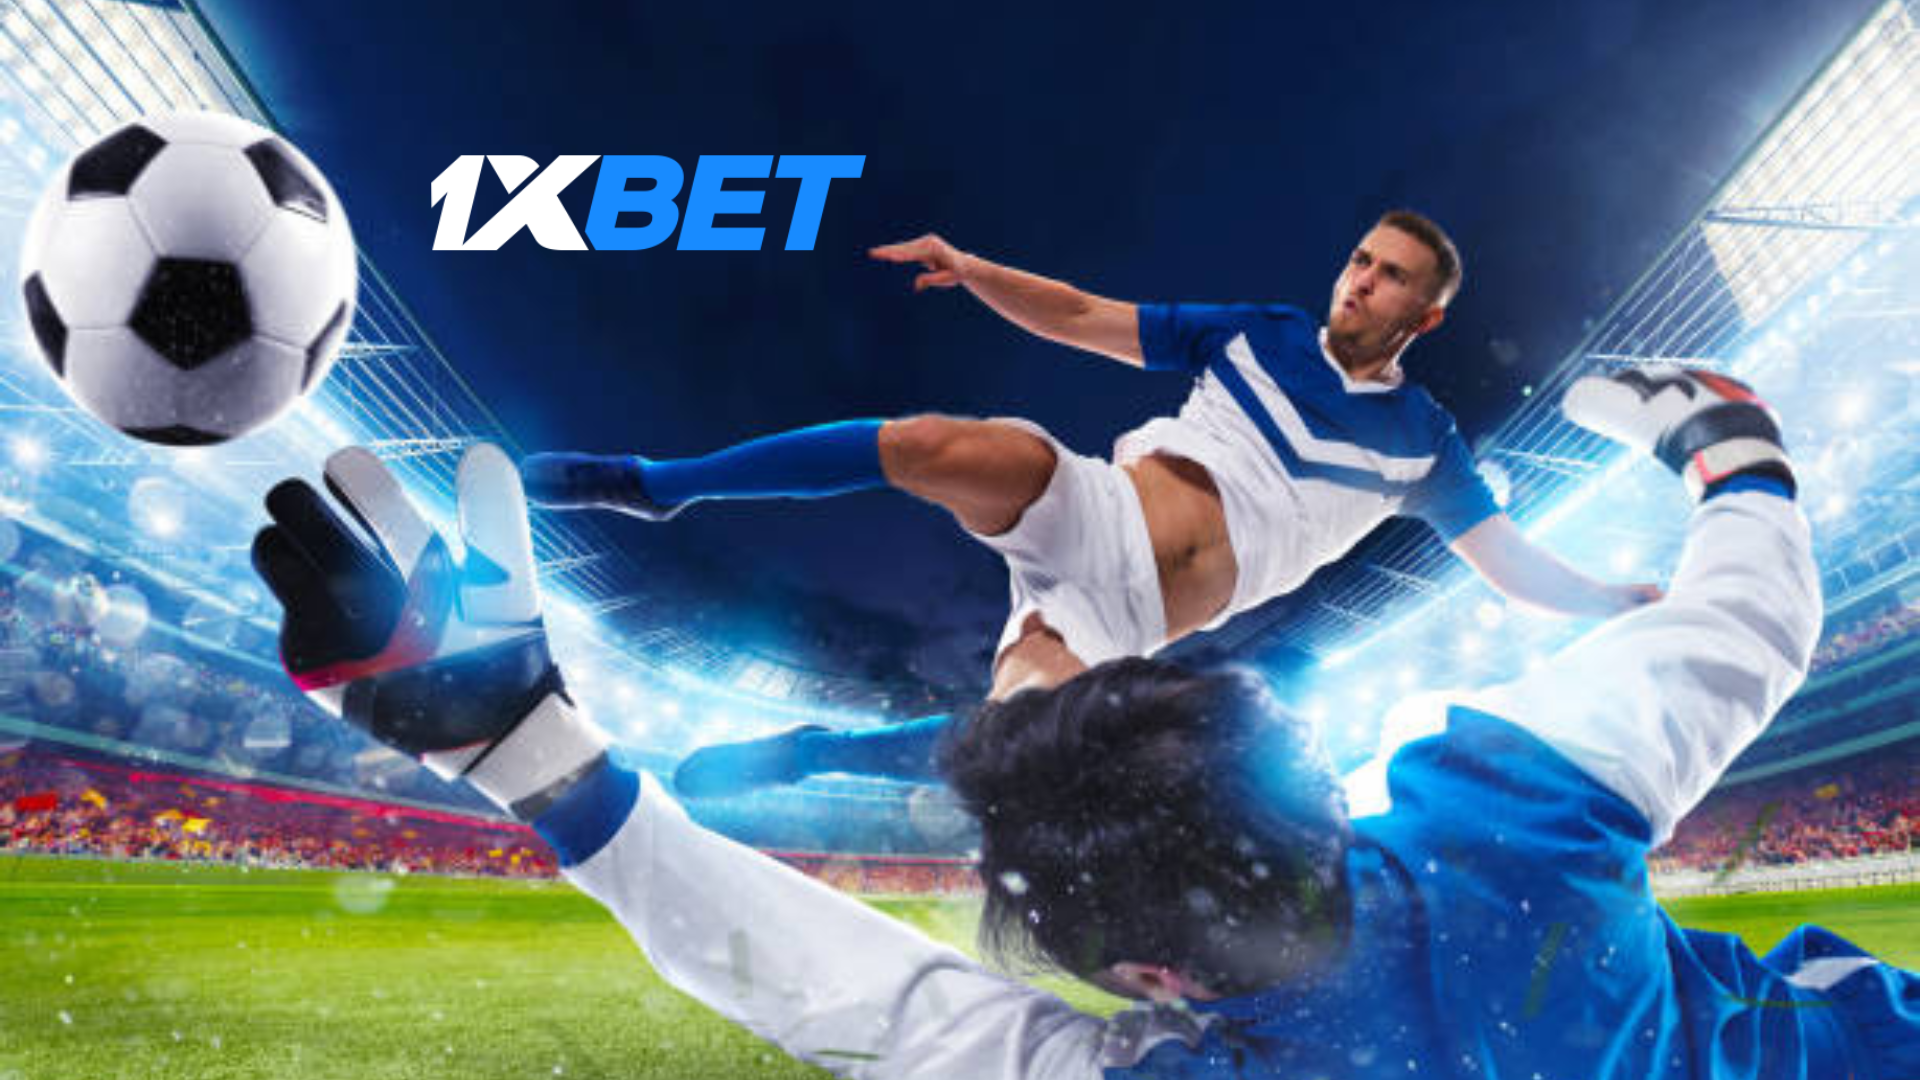 1xbet Online India Betting Site | Best Place for Bet